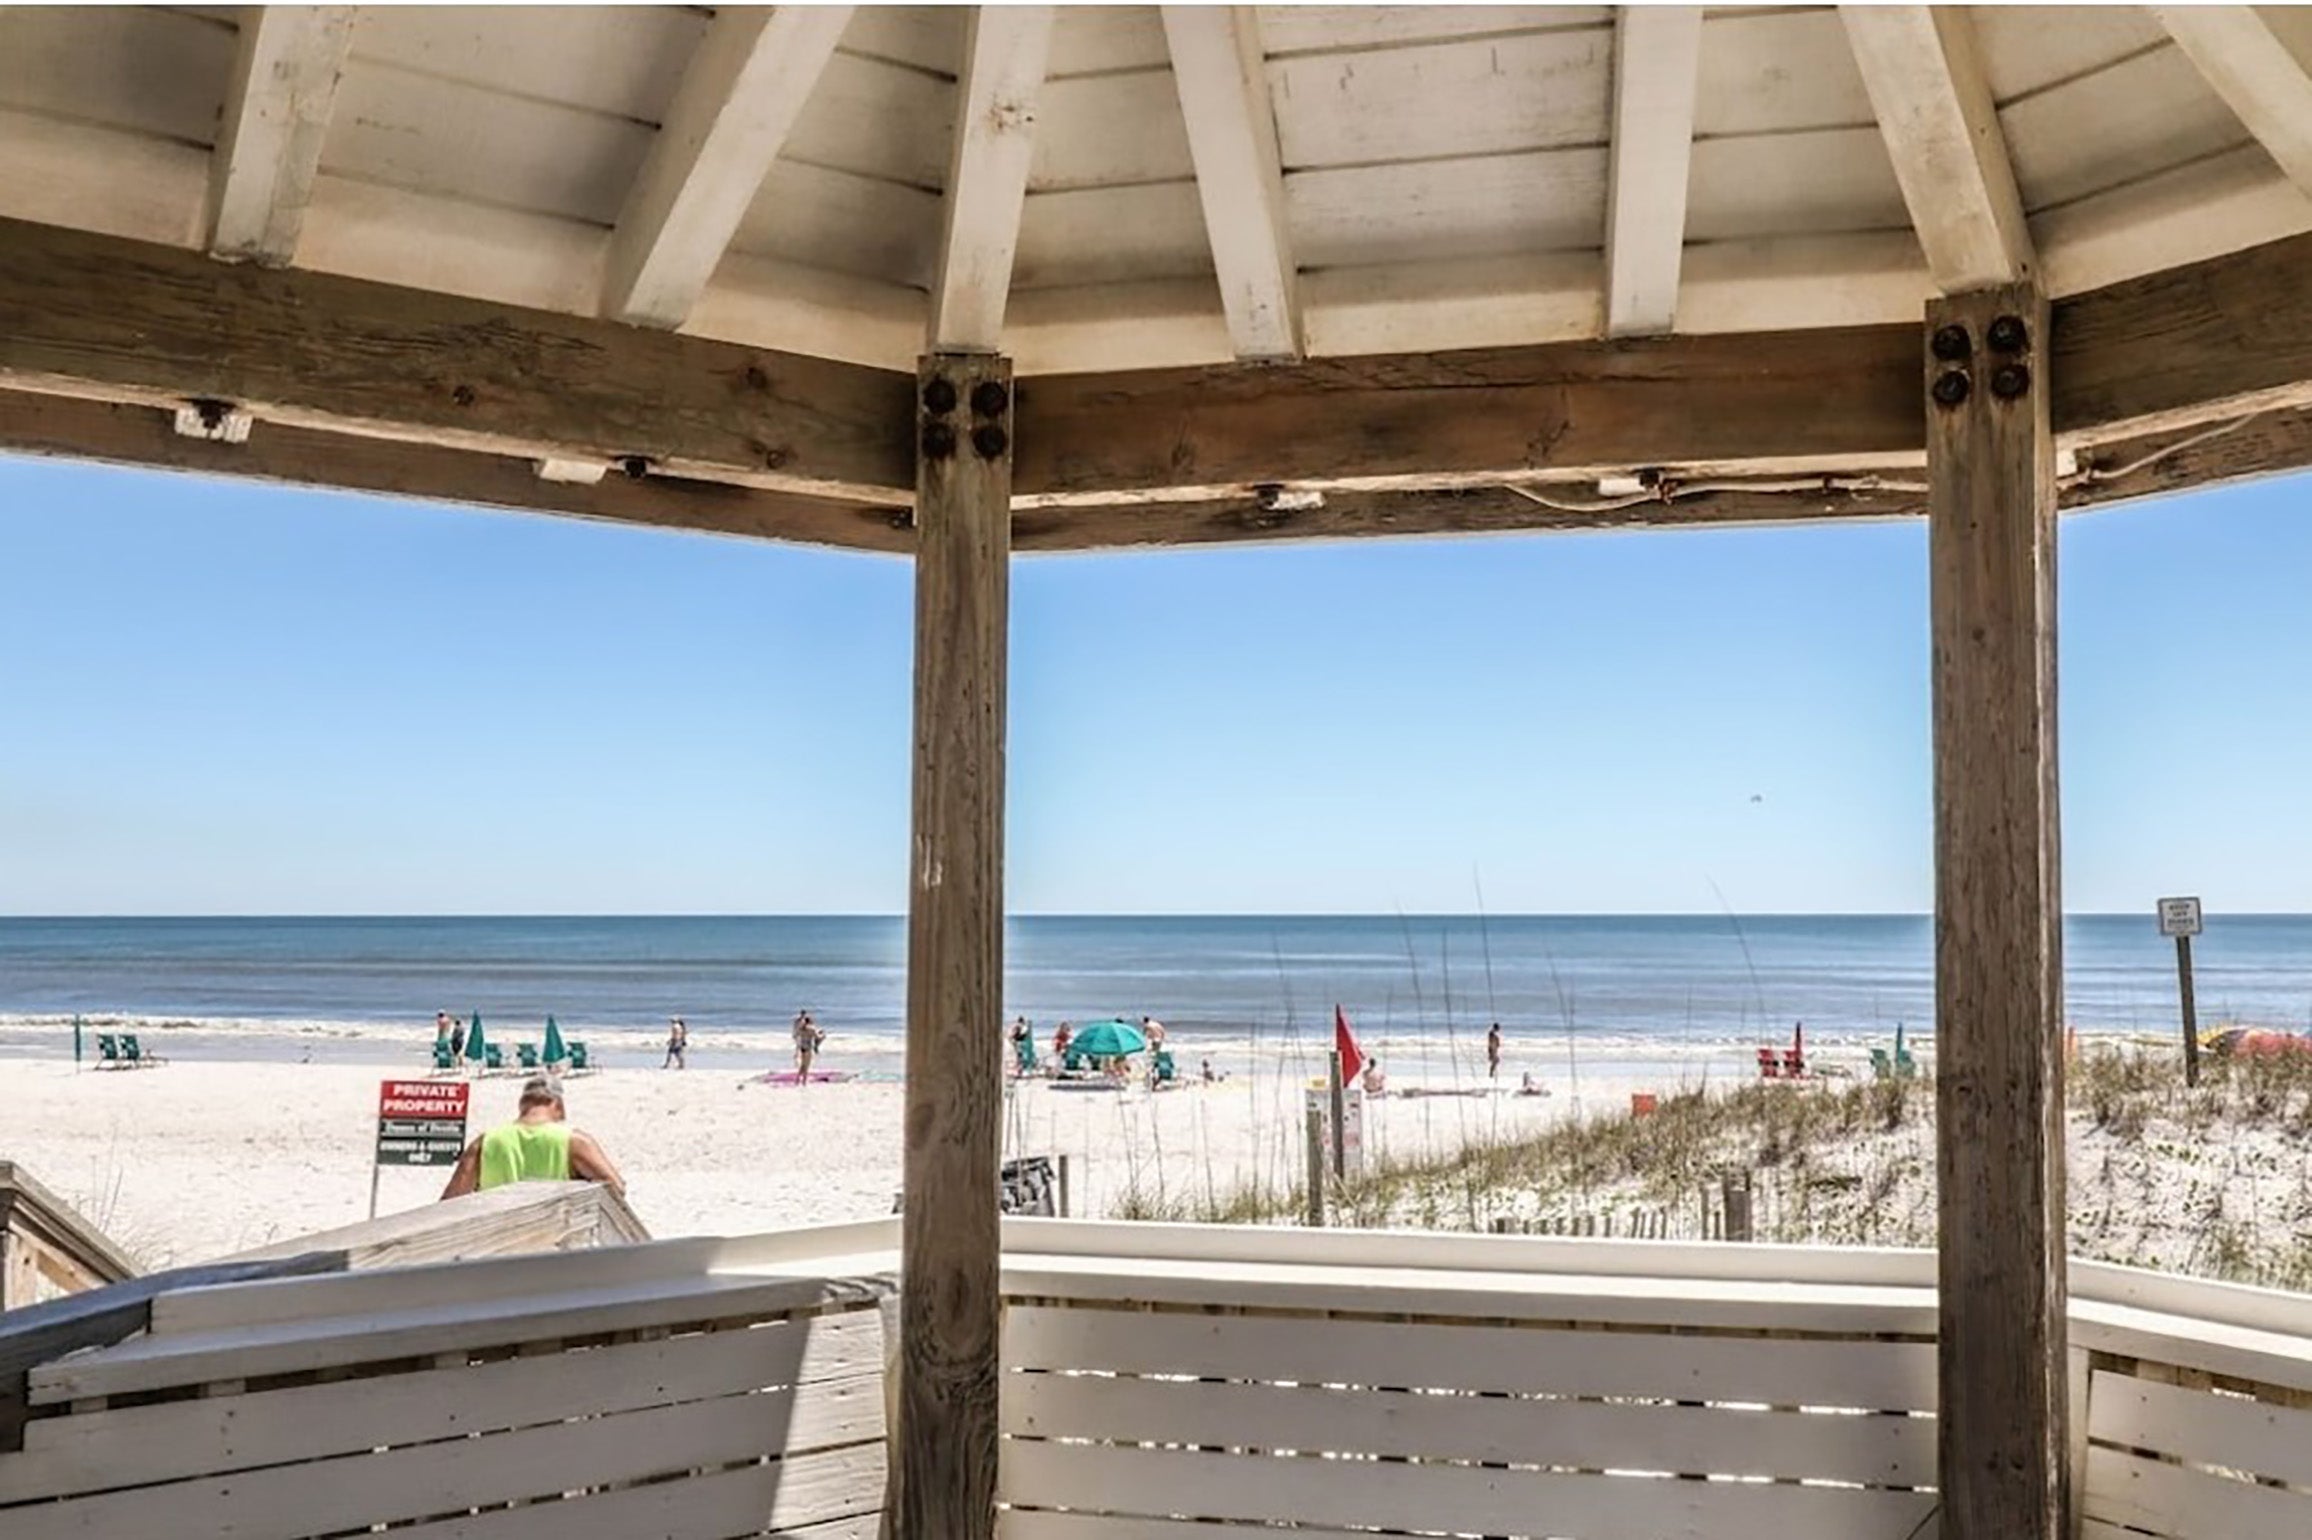 Enjoy your morning cup of coffee overlooking the Gulf from Southbay's gazebo